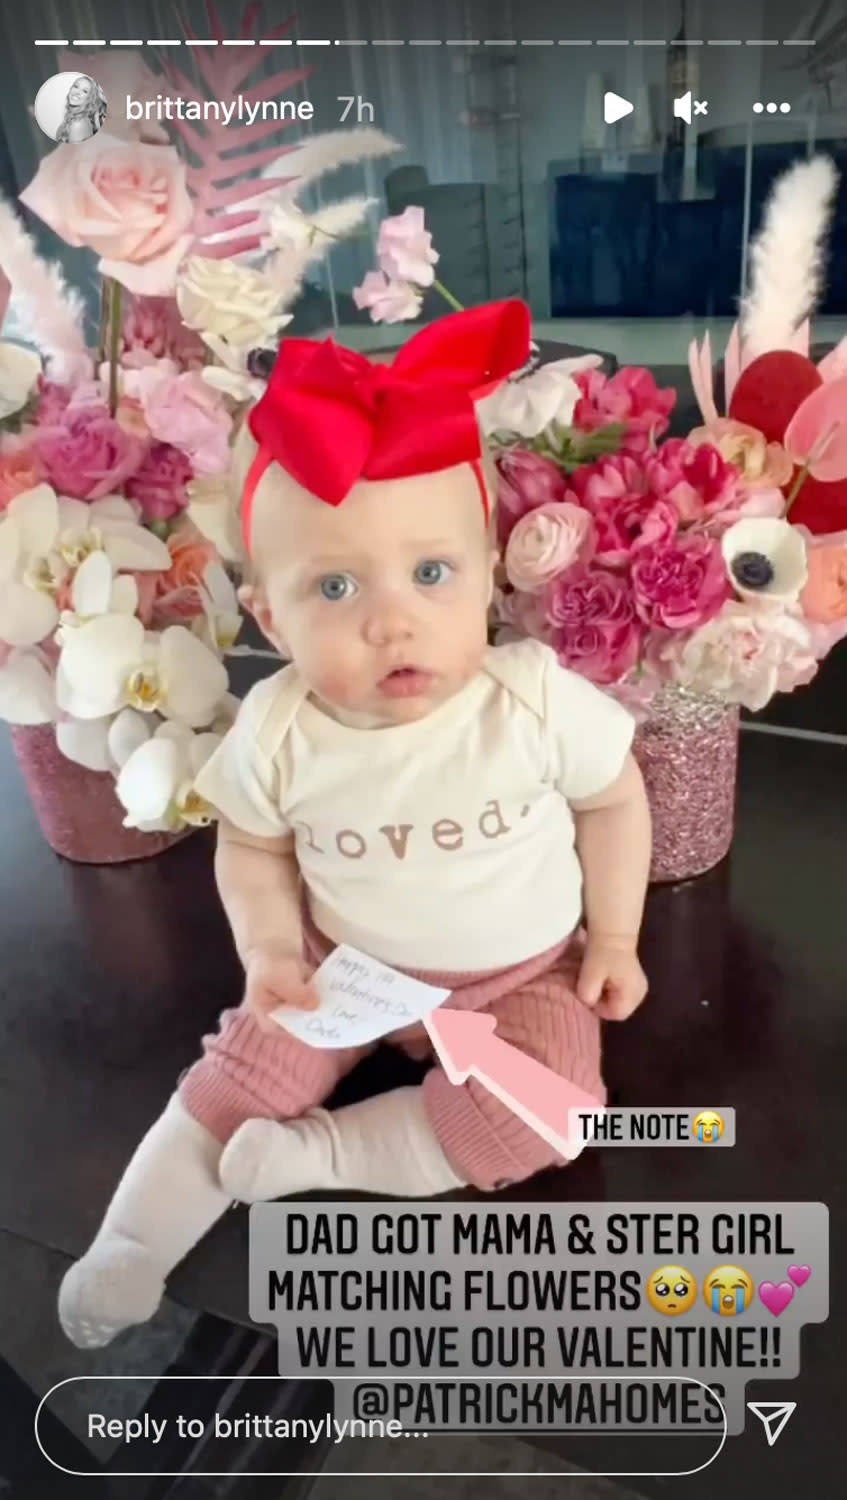 <p>"Dad got Mama & Ster Girl matching flowers," Matthews shared on her Instagram Story on Valentine's Day 2022. "We love our valentine!"</p>